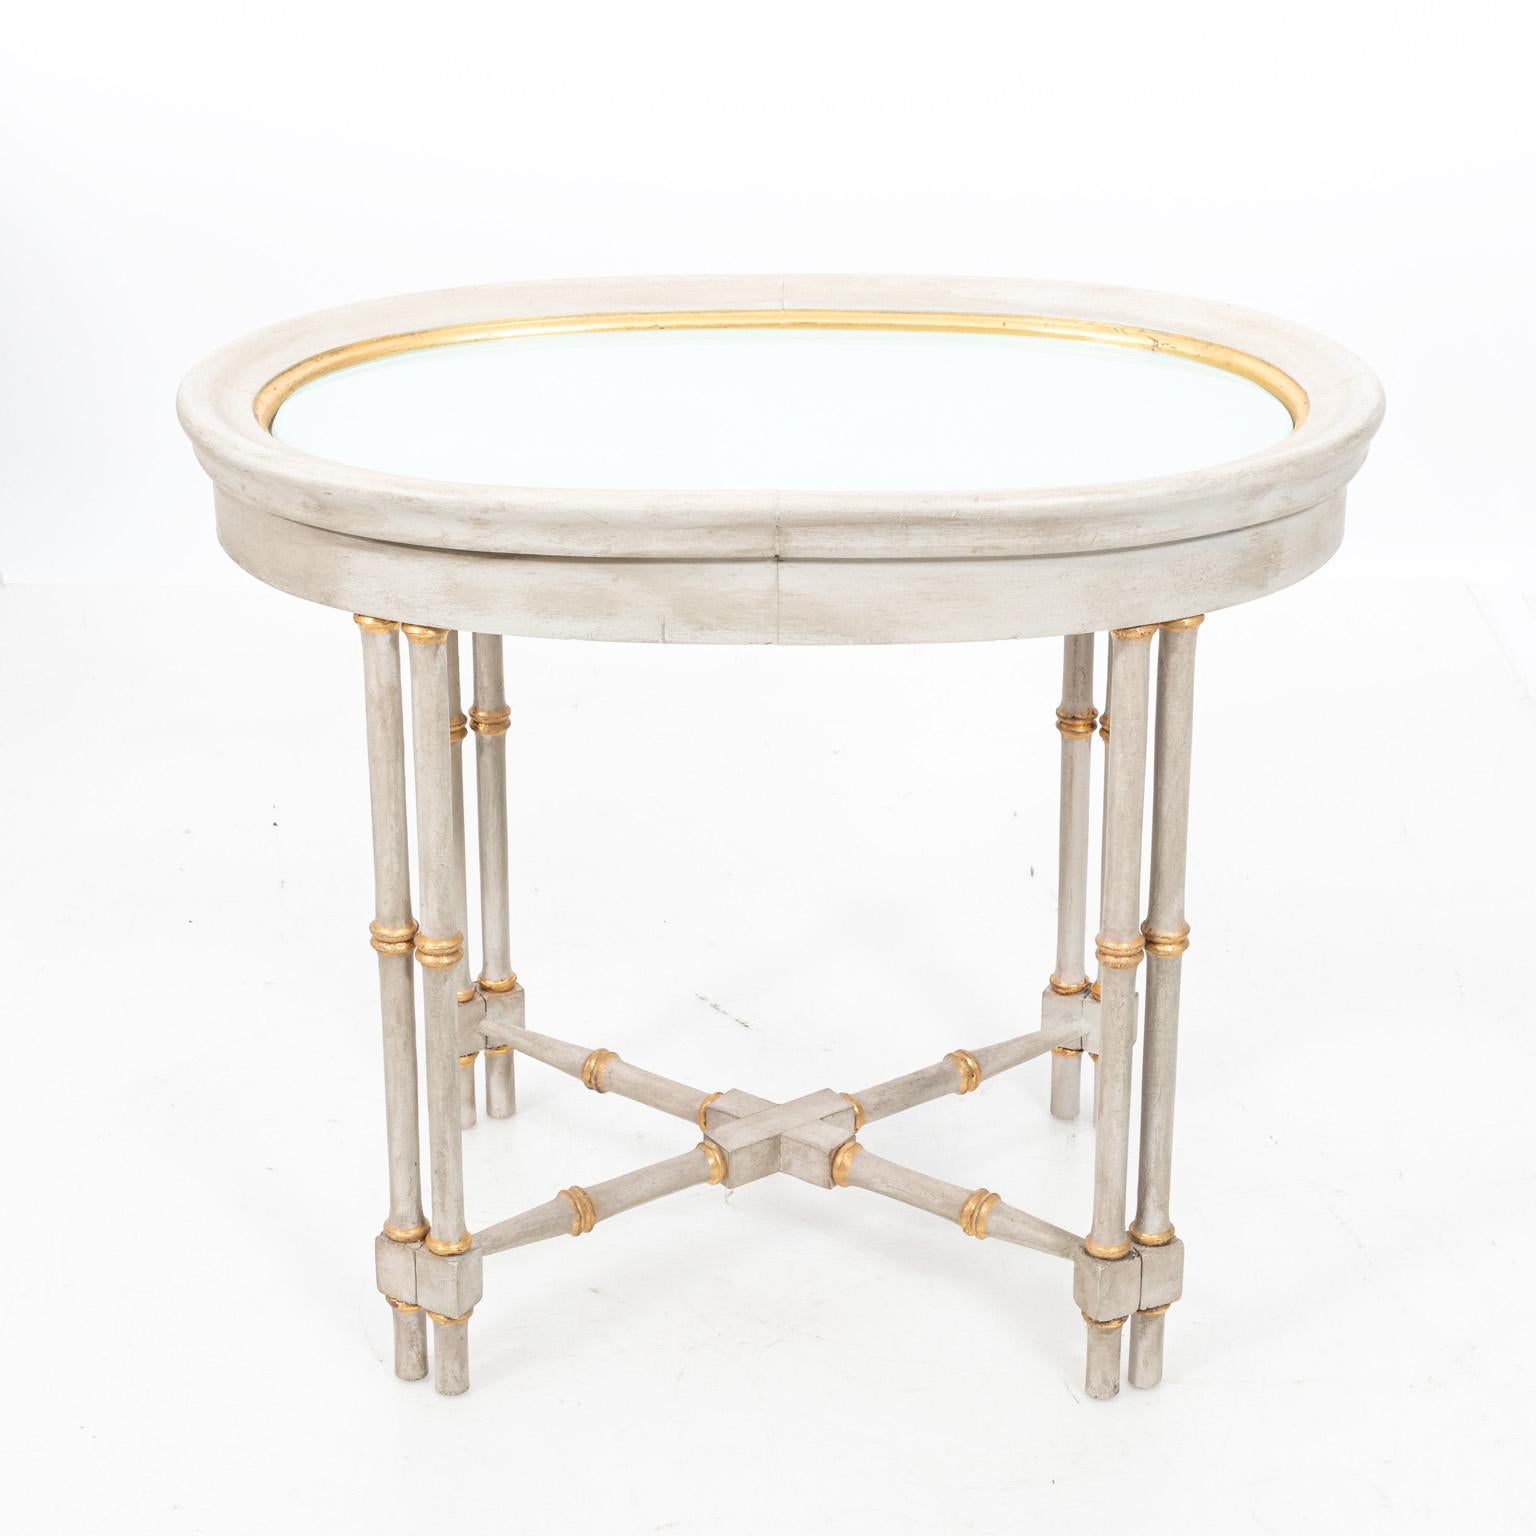 Pair of gray and gilded faux bamboo oval side tables with glass top insert and x-shaped cross stretcher, circa mid-20th century. Made in Italy.